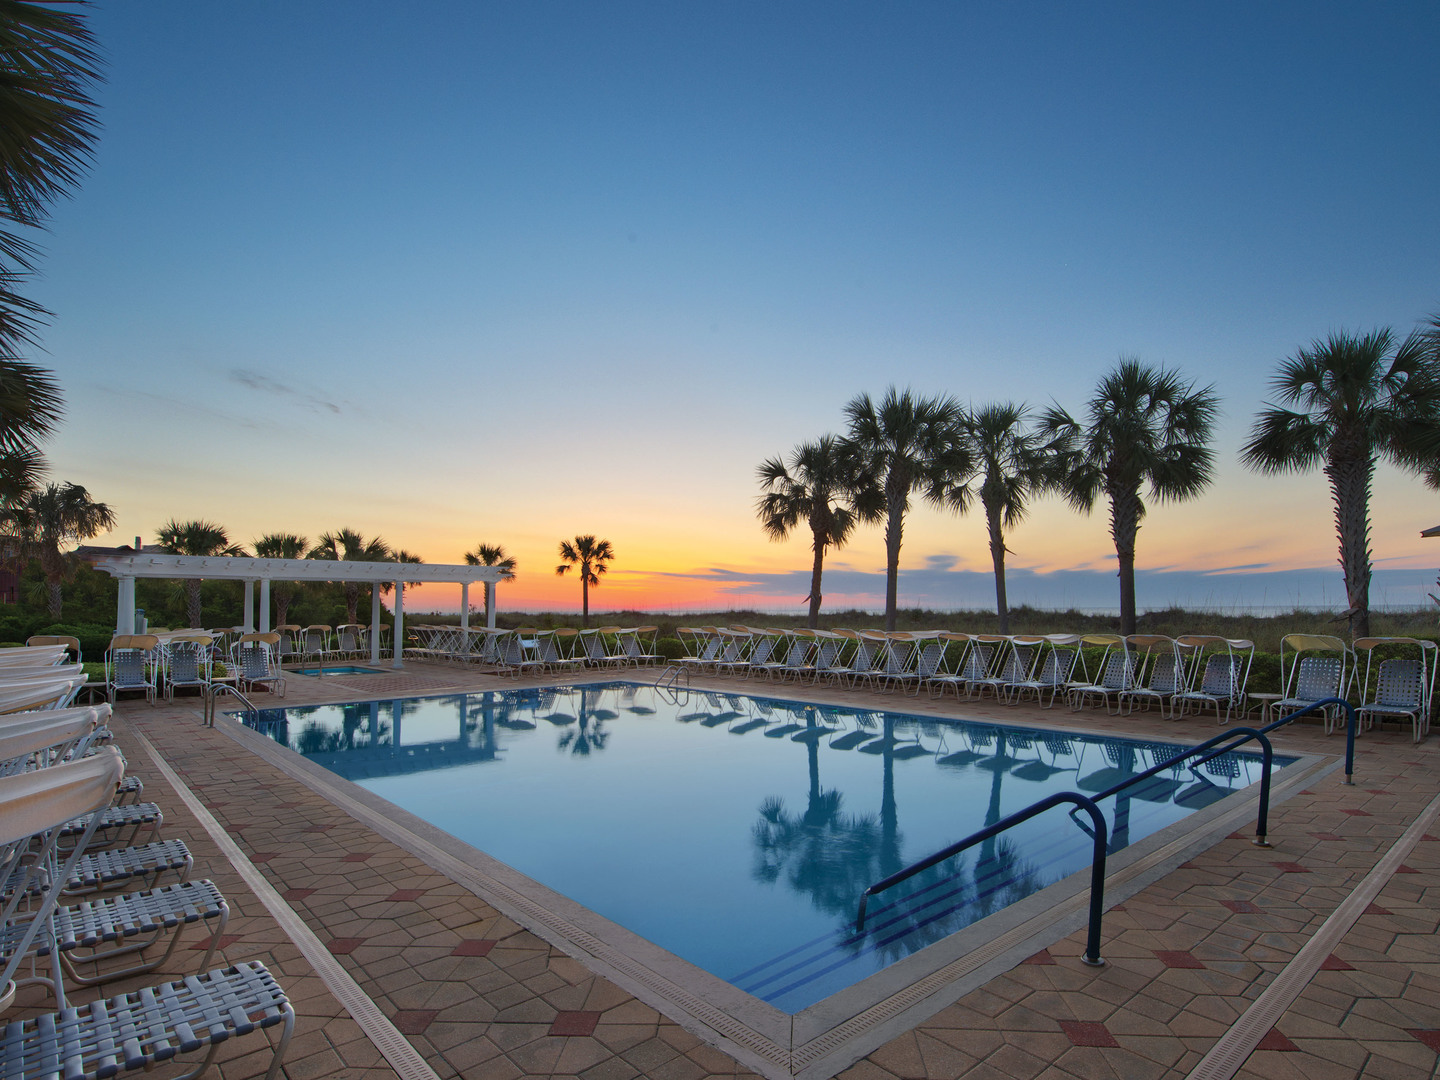 Marriott's SurfWatch<span class='trademark'>®</span> Sea Surf Pool. Marriott's SurfWatch<span class='trademark'>®</span> is located in Hilton Head Island, South Carolina United States.